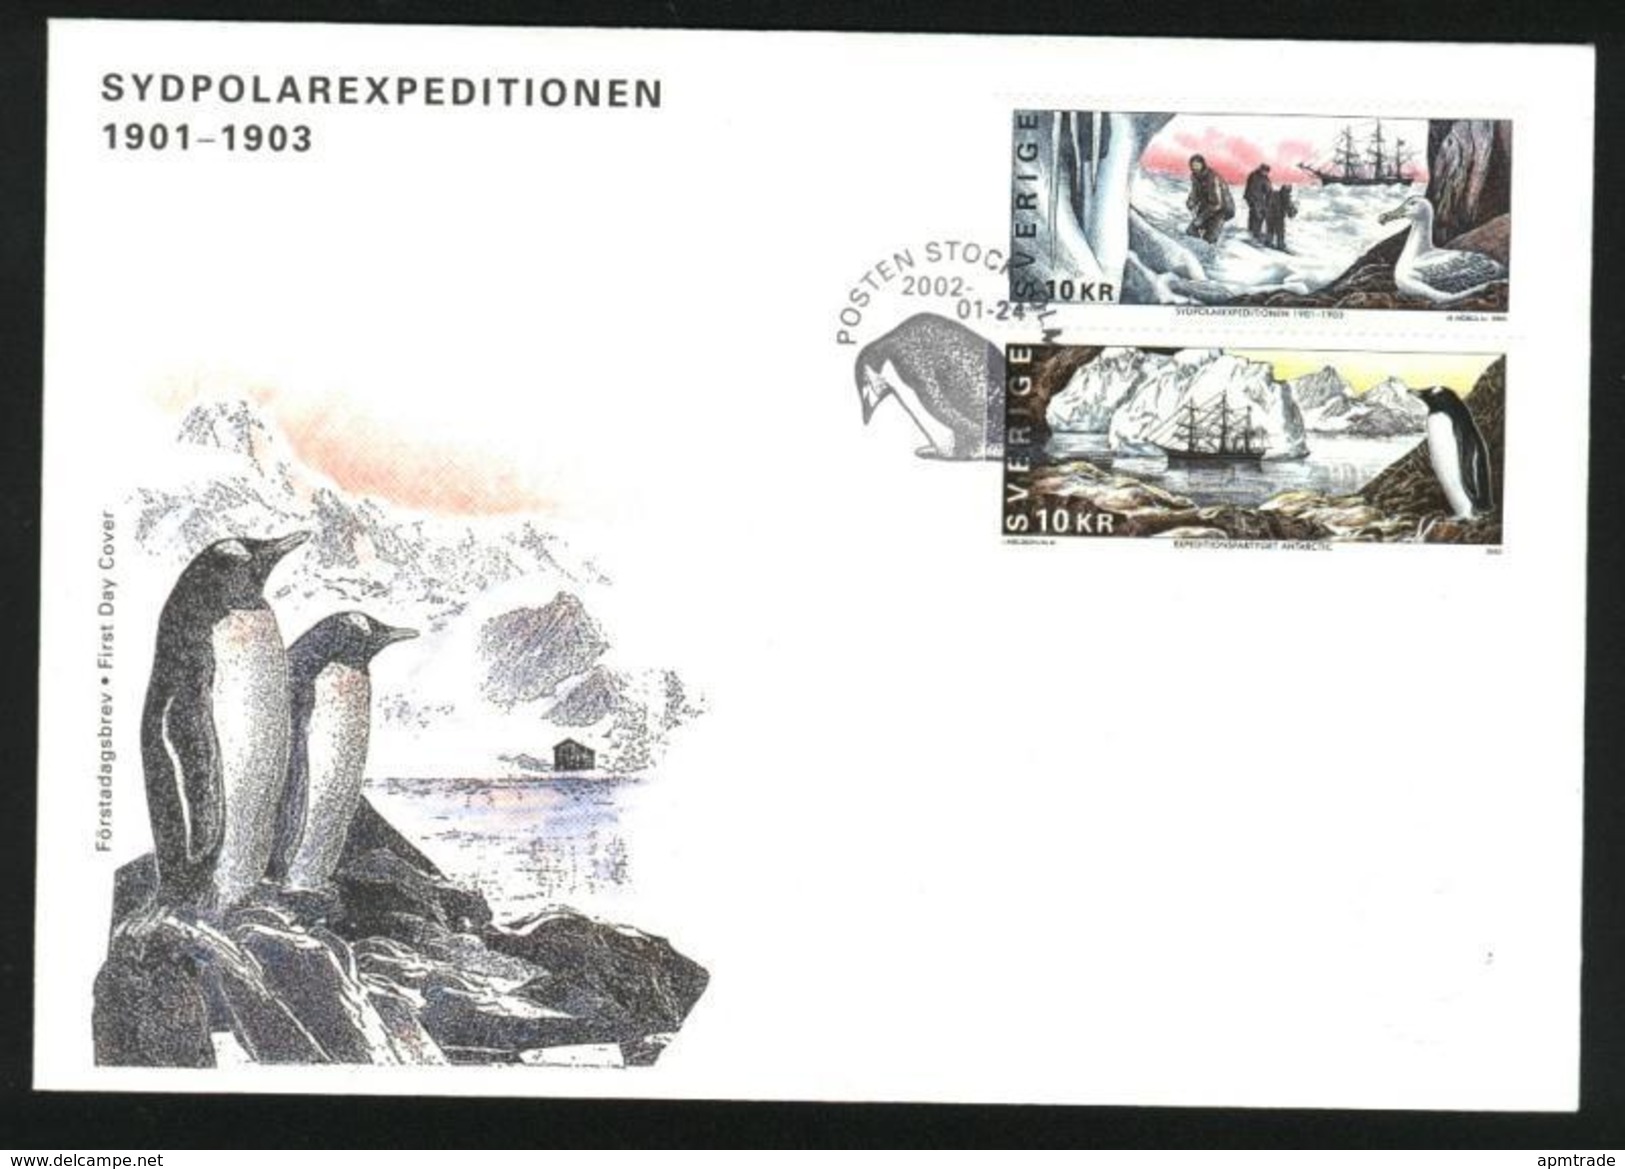 Sweden. FDC Cachet 2002 The South Pole Expedition 1901-03. Engraver: M. Morck - FDC